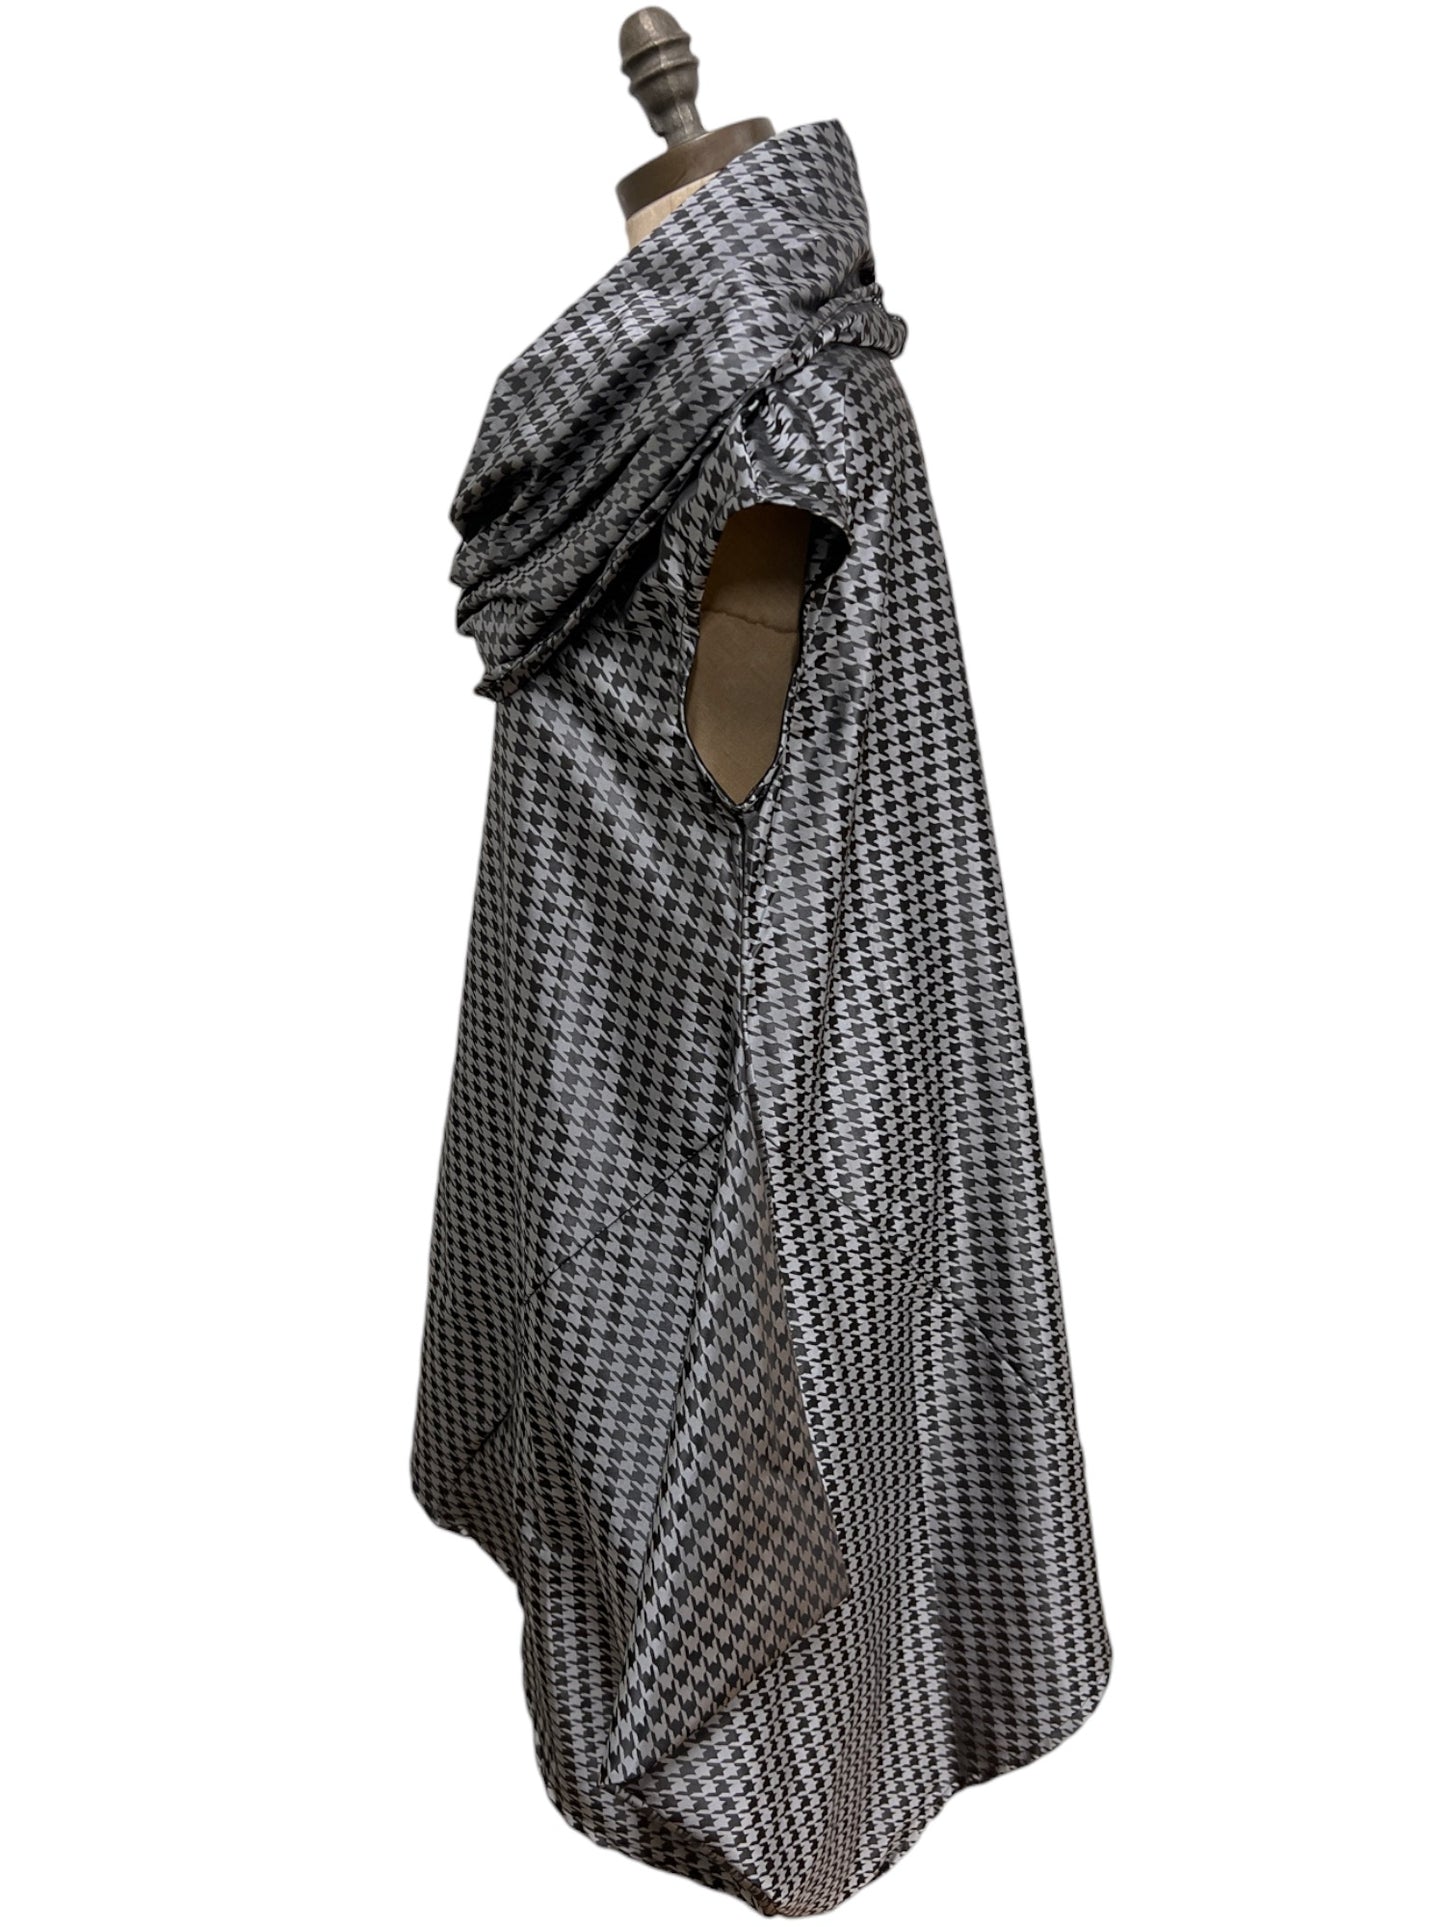 Noa Tunic in Houndstooth